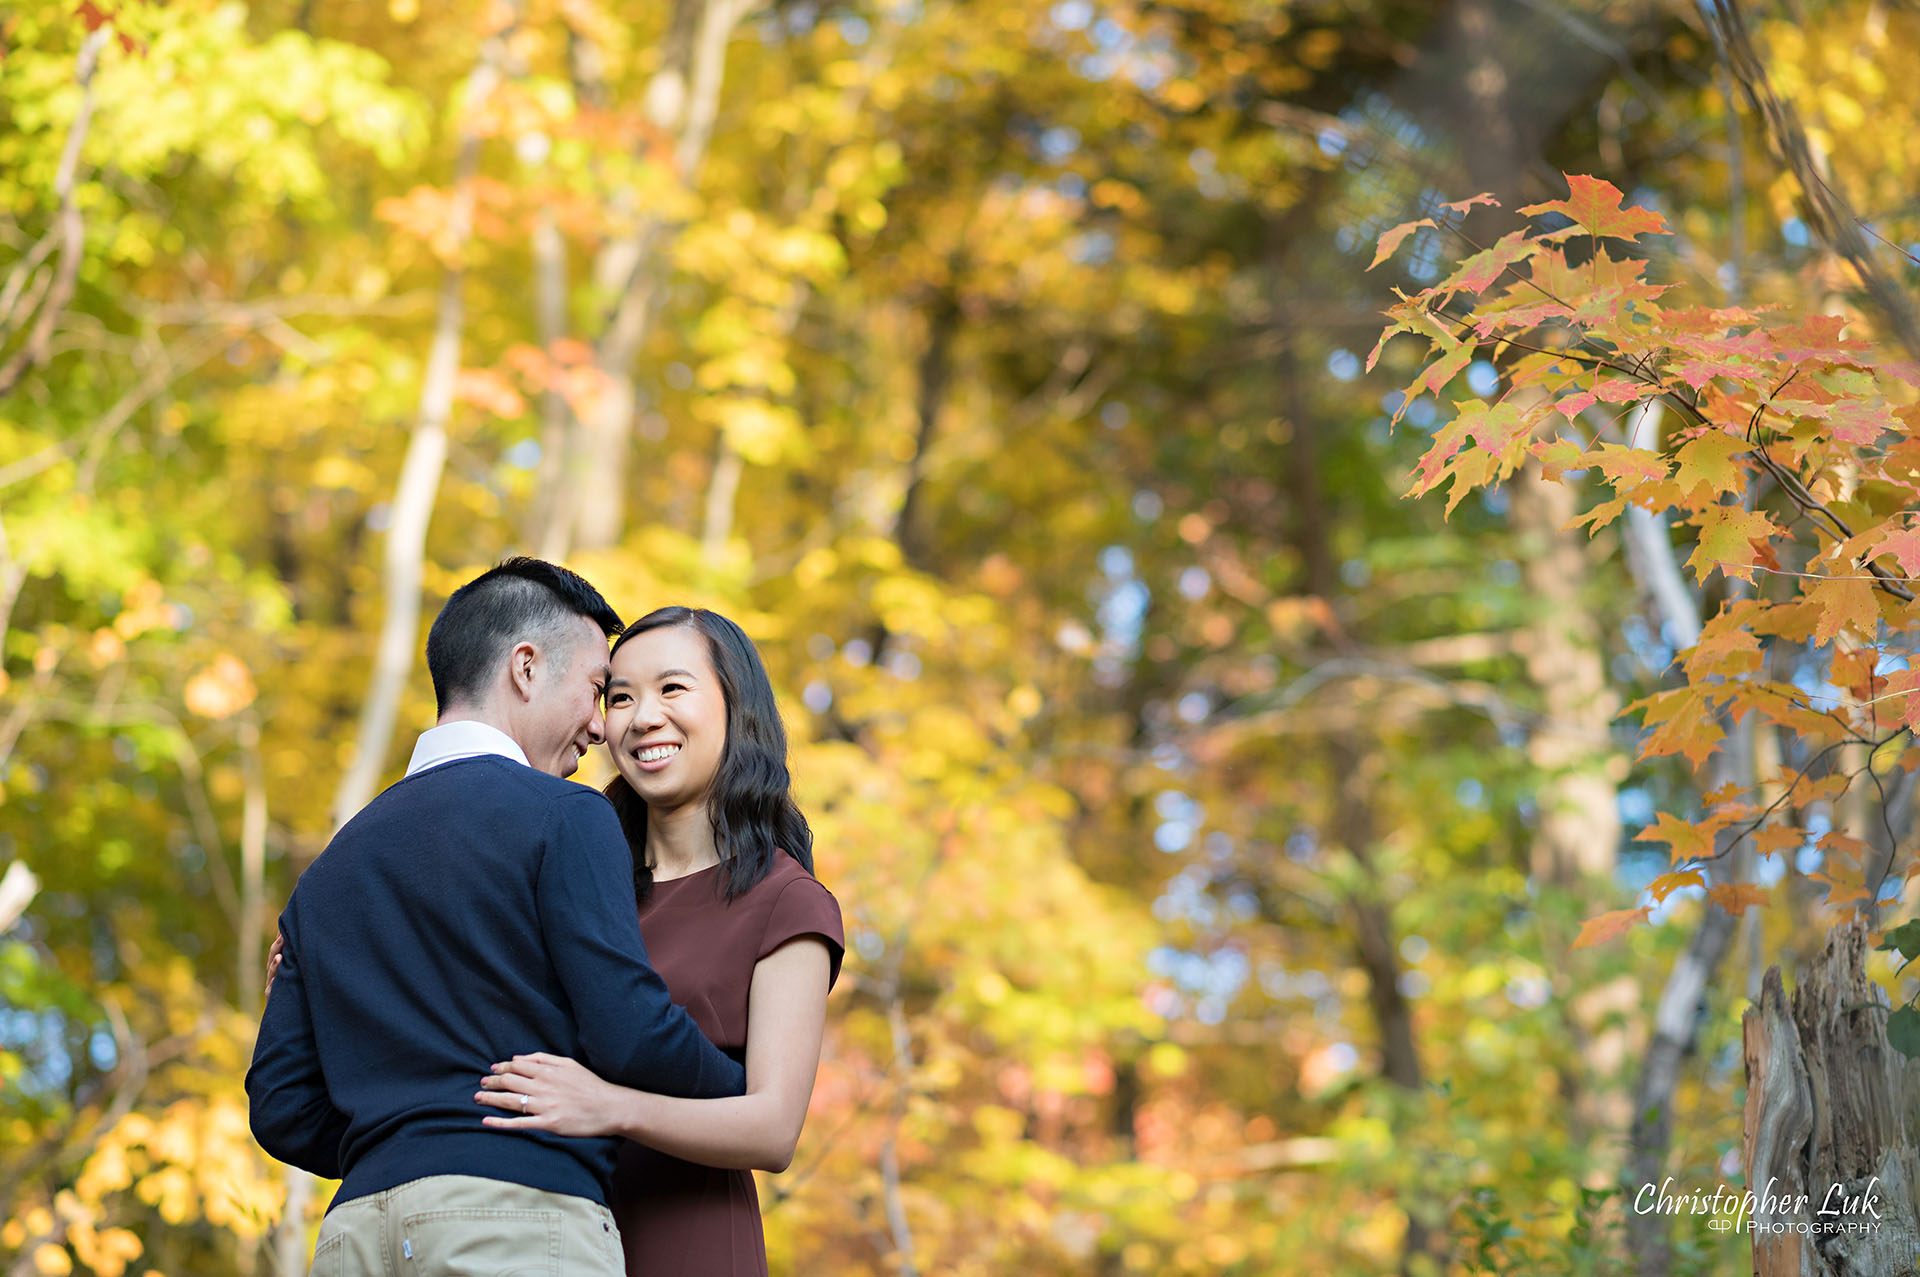 Christopher Luk Toronto Wedding Engagement Session Photographer Autumn Fall Leaves Natural Candid Photojournalistic Bride Groom Hiking Trail Trees Hug Holding Each Other Together Orange Red Yellow